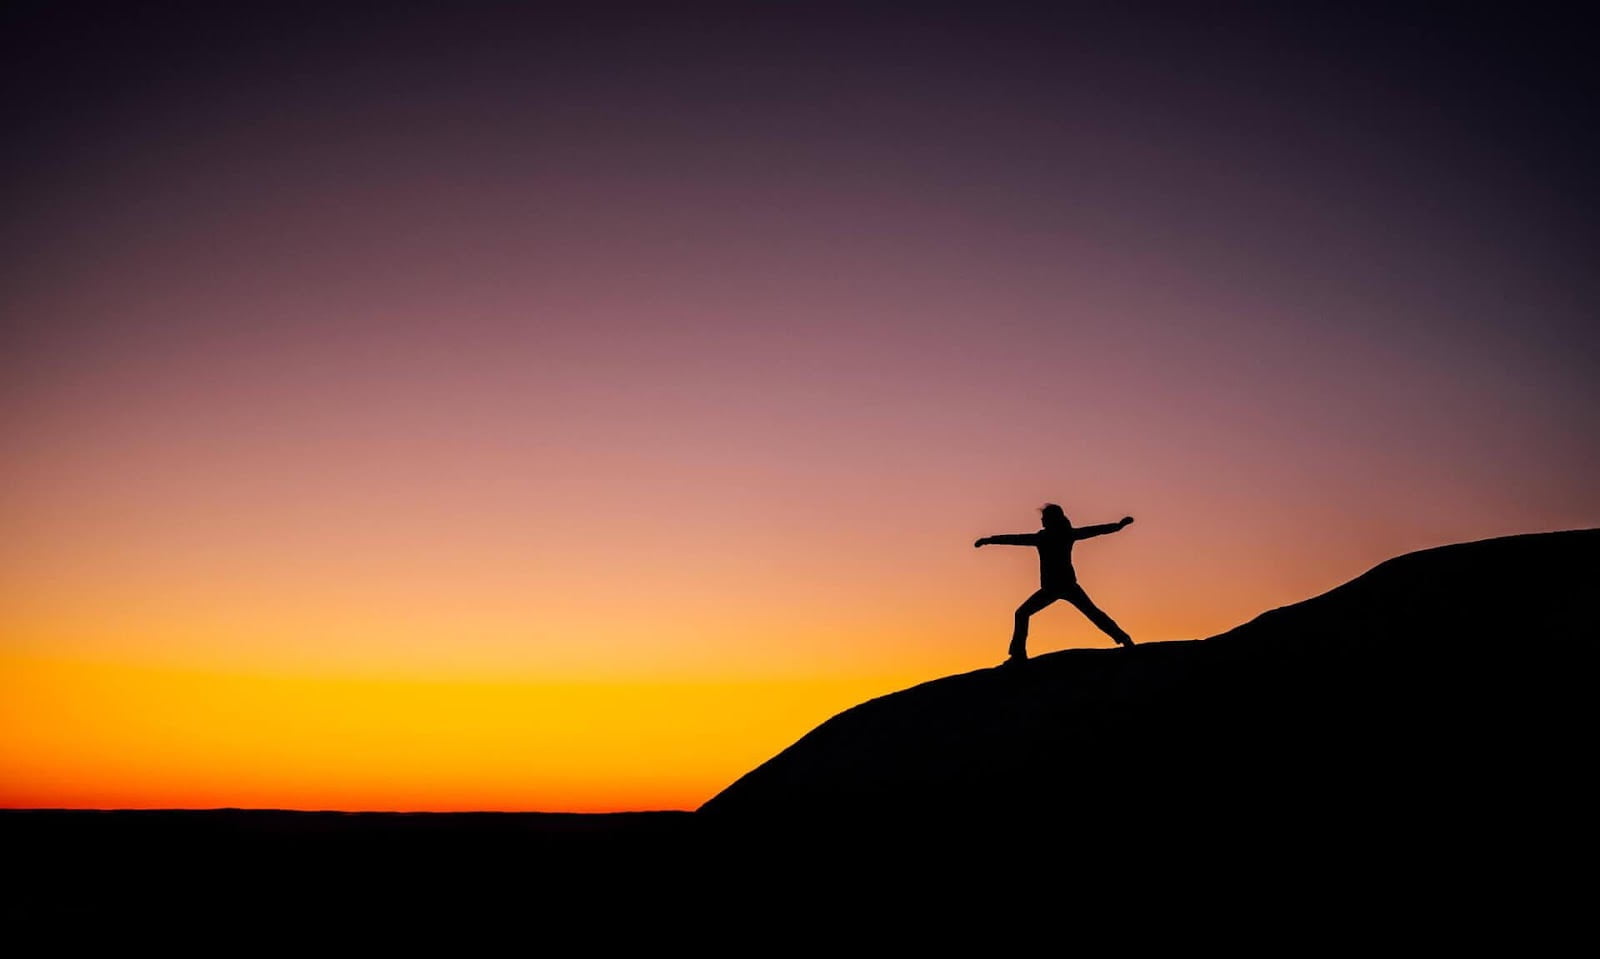 A person standing on a hill with a sunset in the background

Description automatically generated with medium confidence